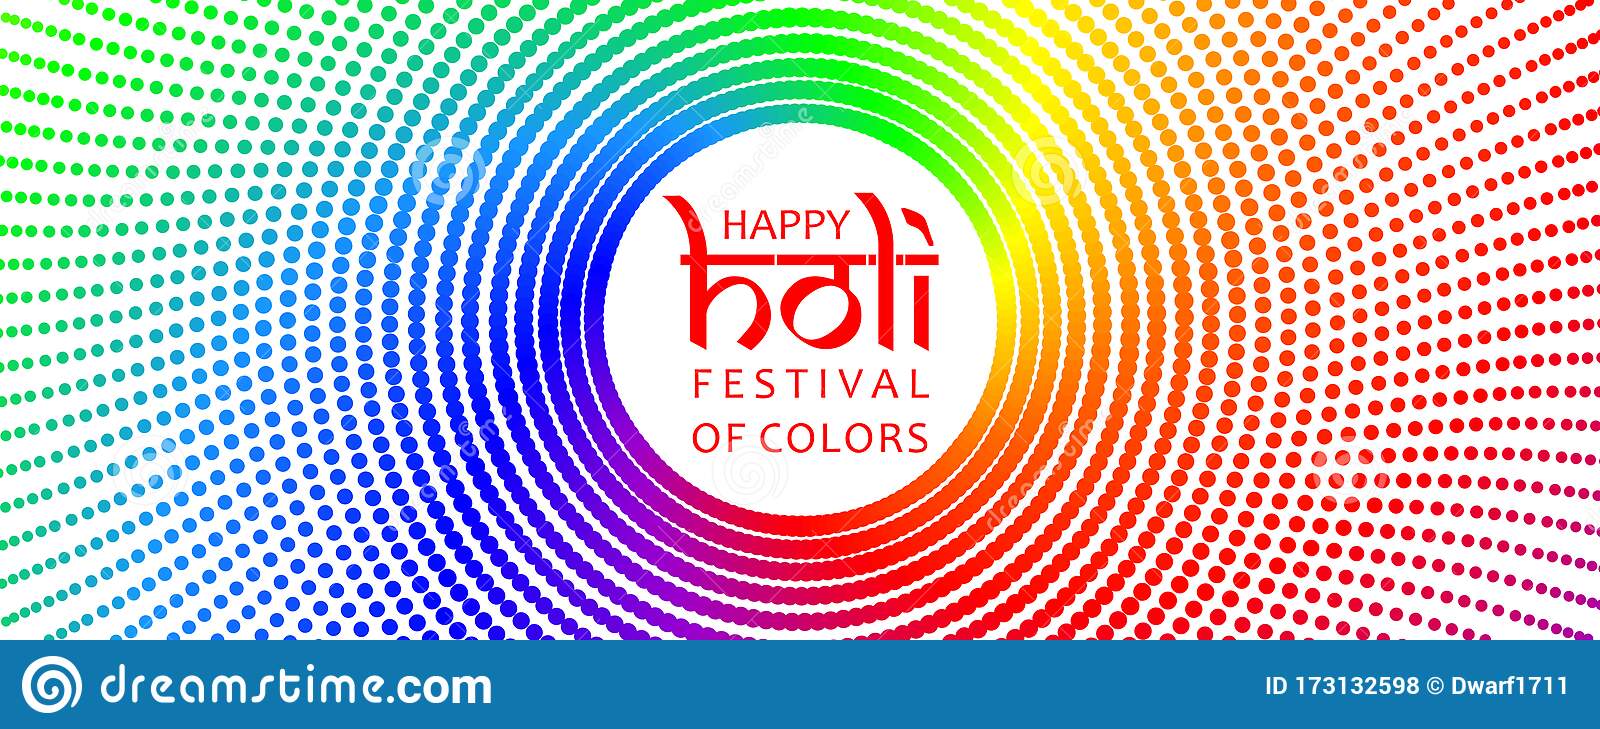 Happy Holi festival of colors vector background with rainbow dots 